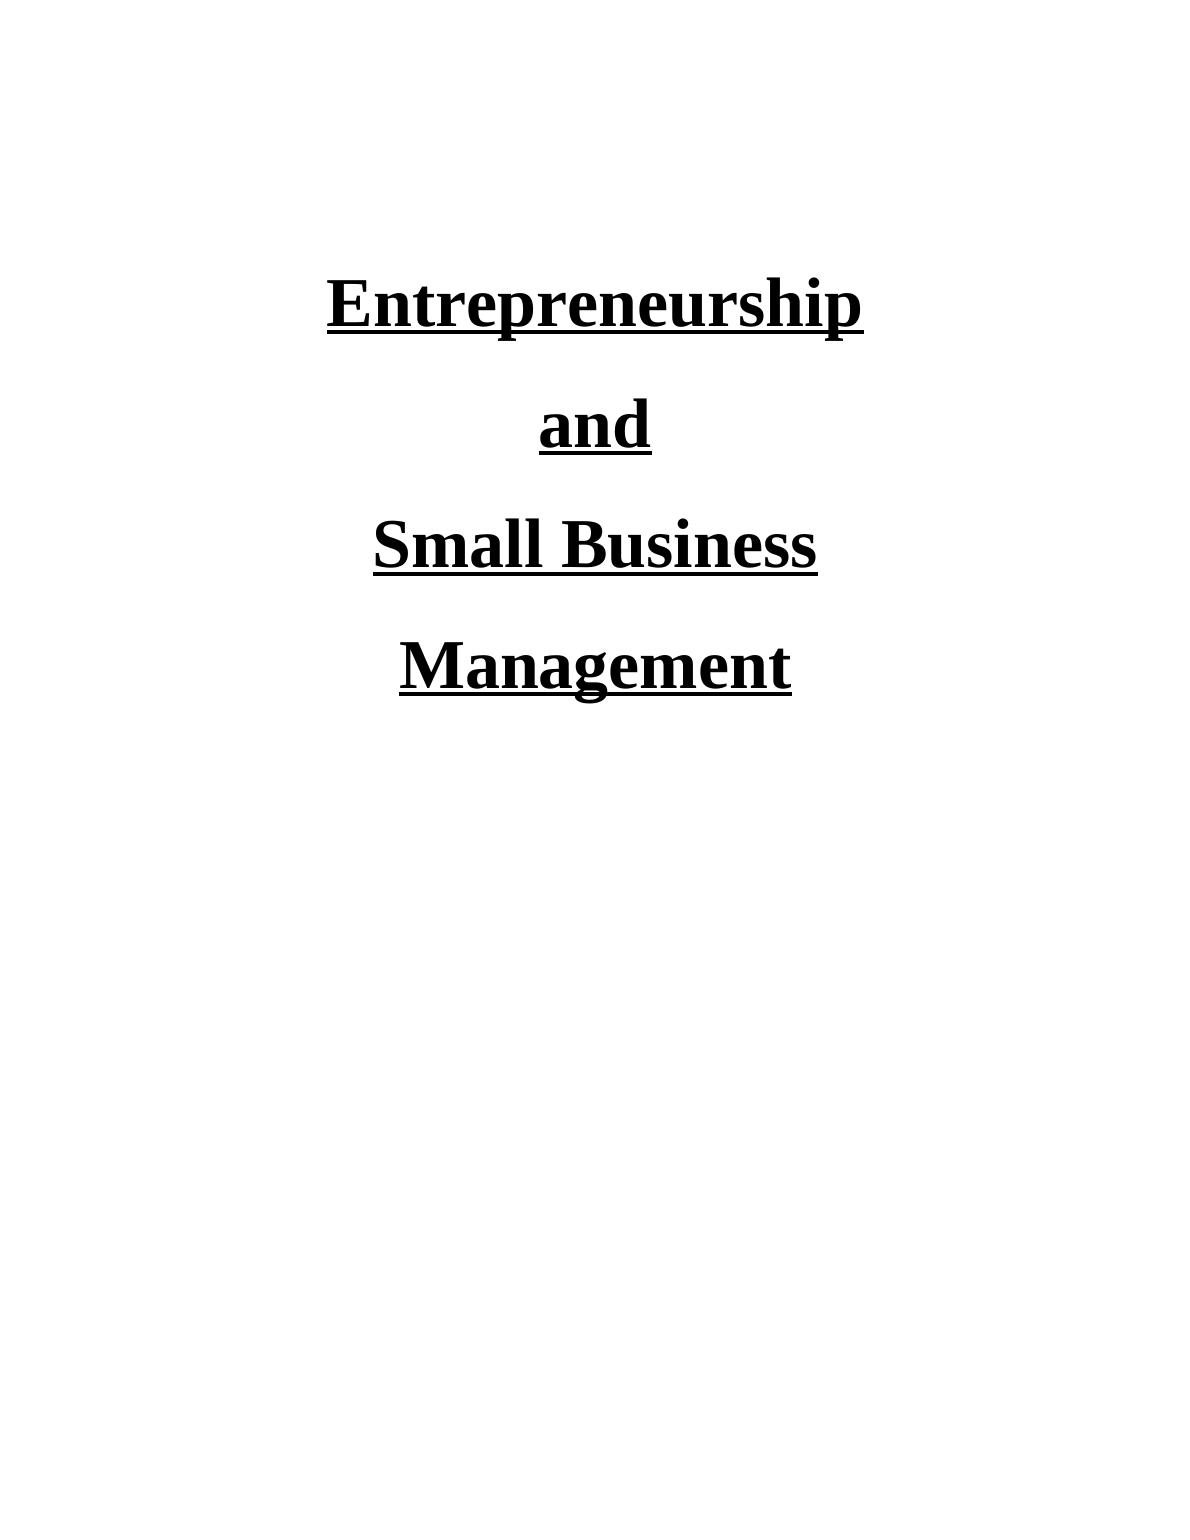 Sample Assignment on Entrepreneurship and Small Business Management (pdf)_1